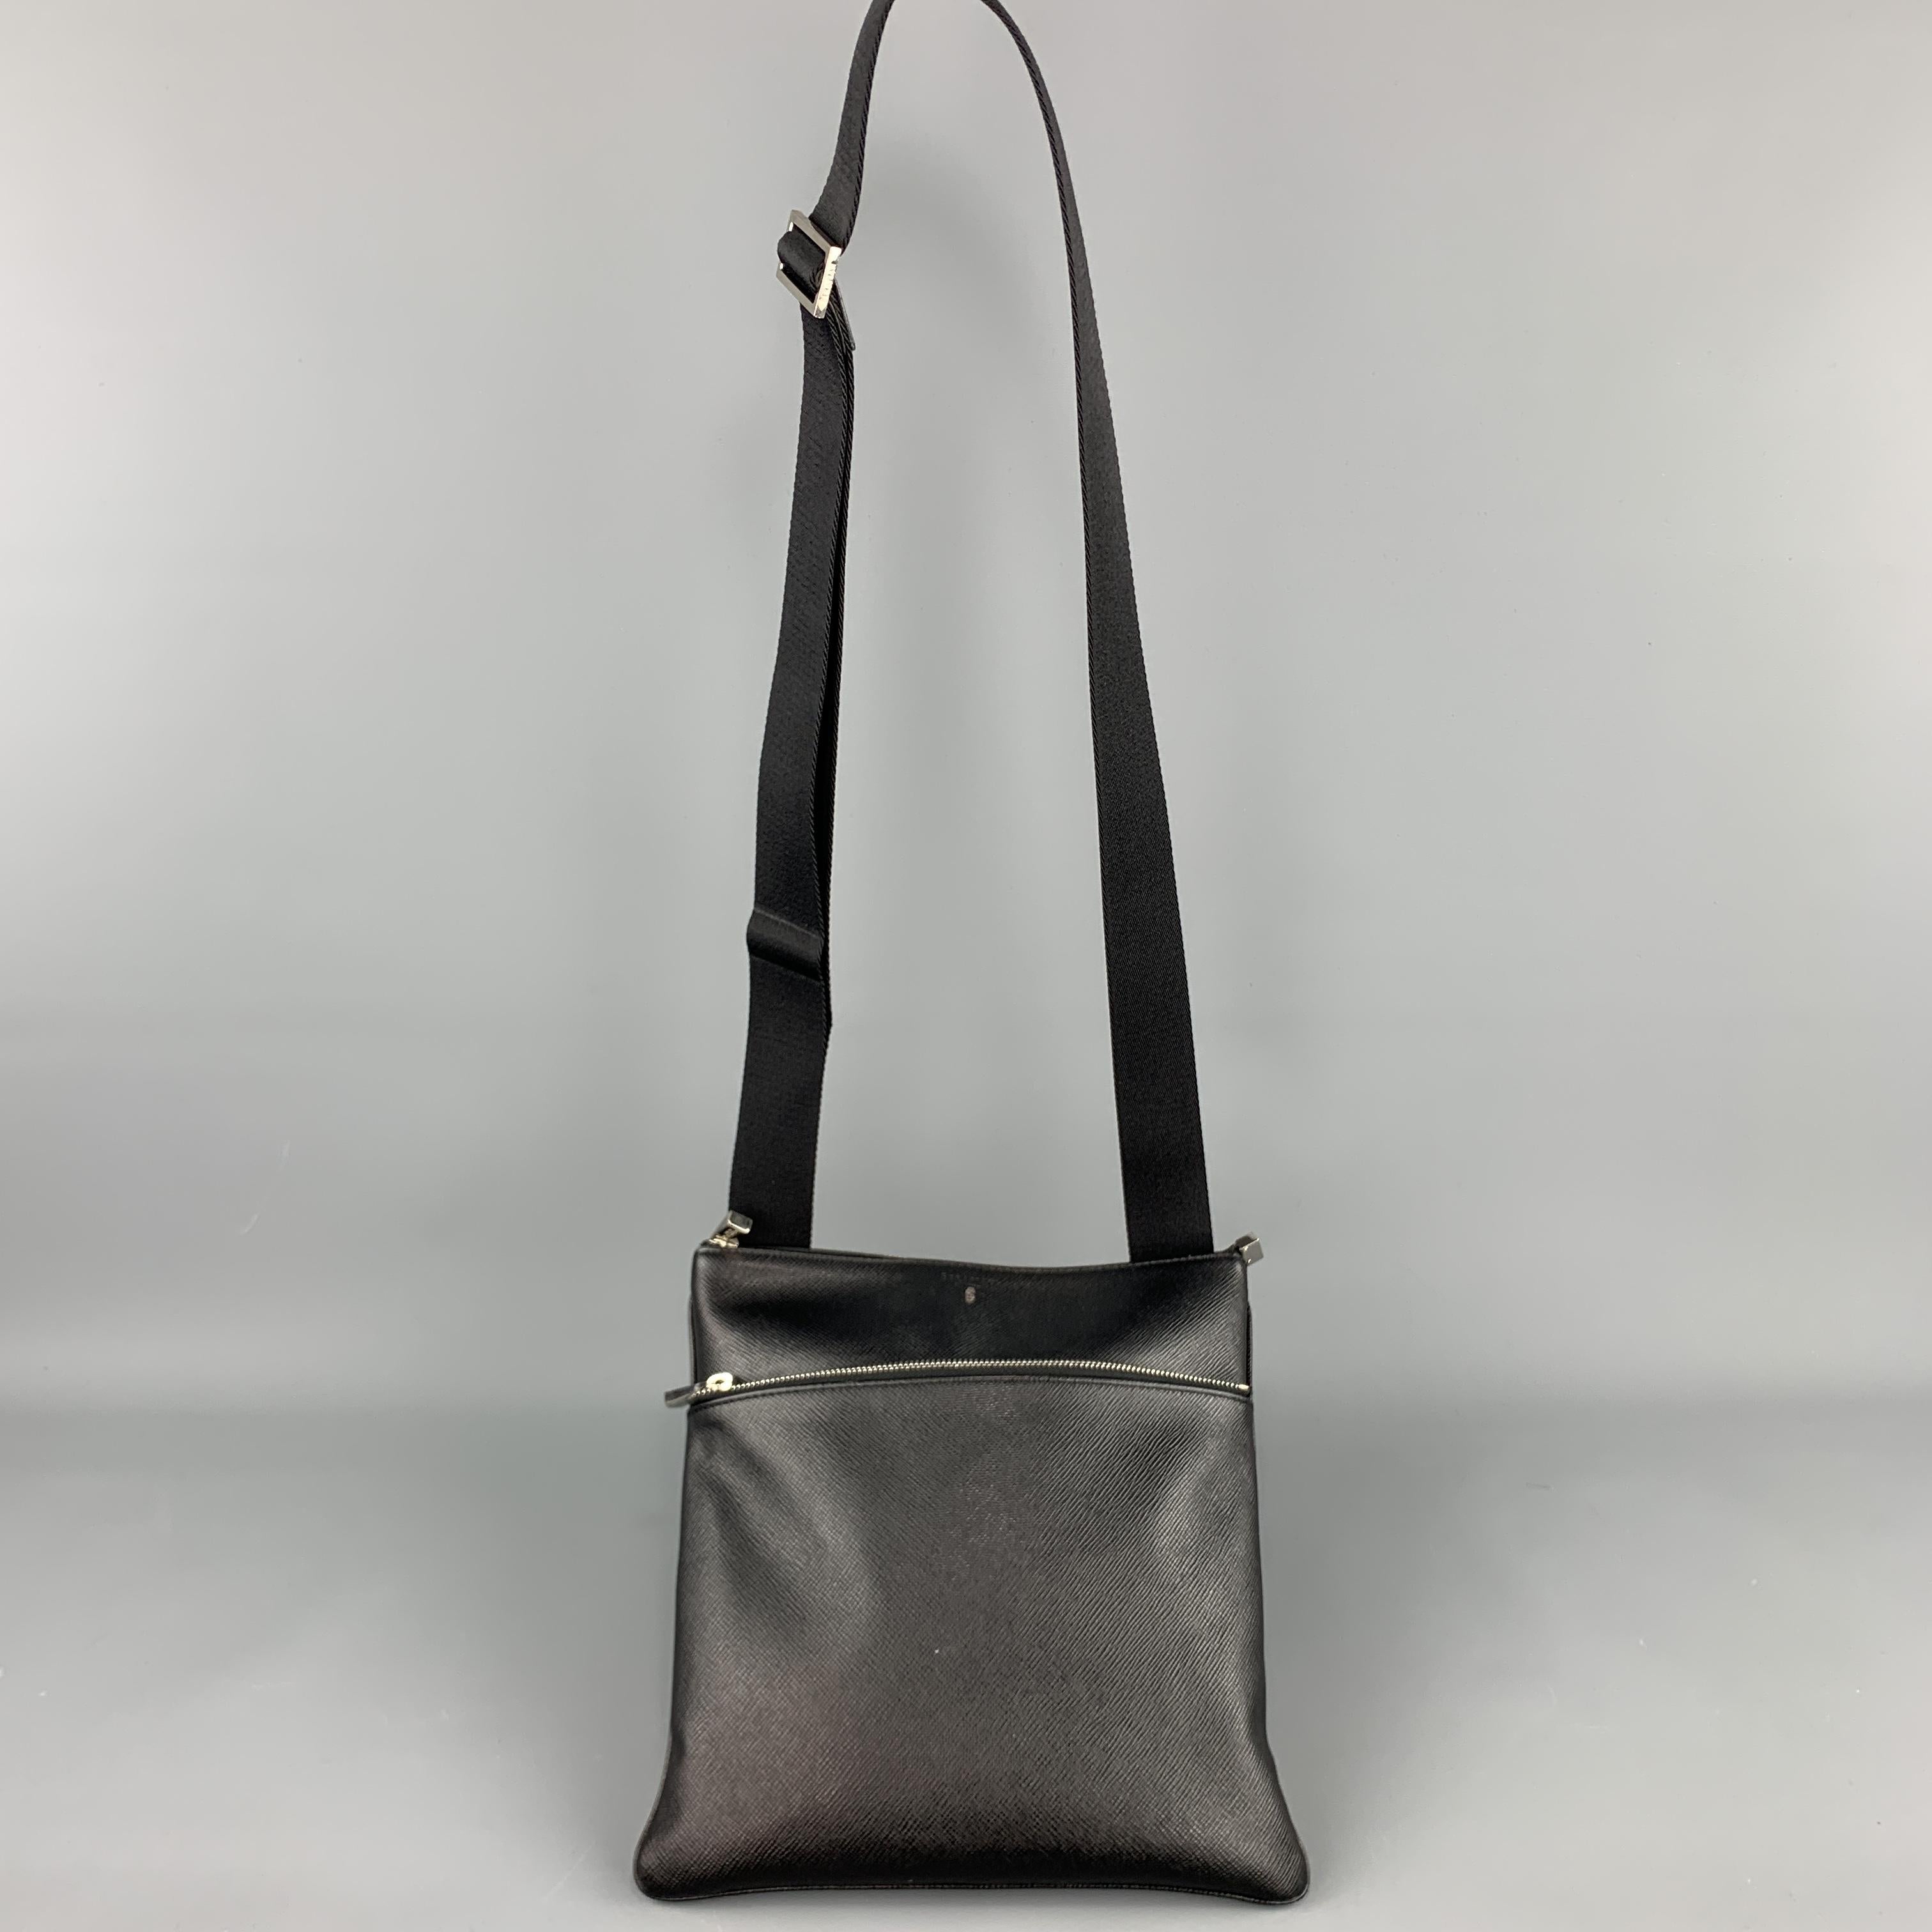 SERAPIAN crossbody bag comes in black Saffiano textured leather with zip pocket and webbing strap. Made in Italy.

Very Good Pre-Owned Condition.

Measurements:

Length: 10.5 in.
Width: 1 in.
Height: 10.5 in.
Drop: 29 in.